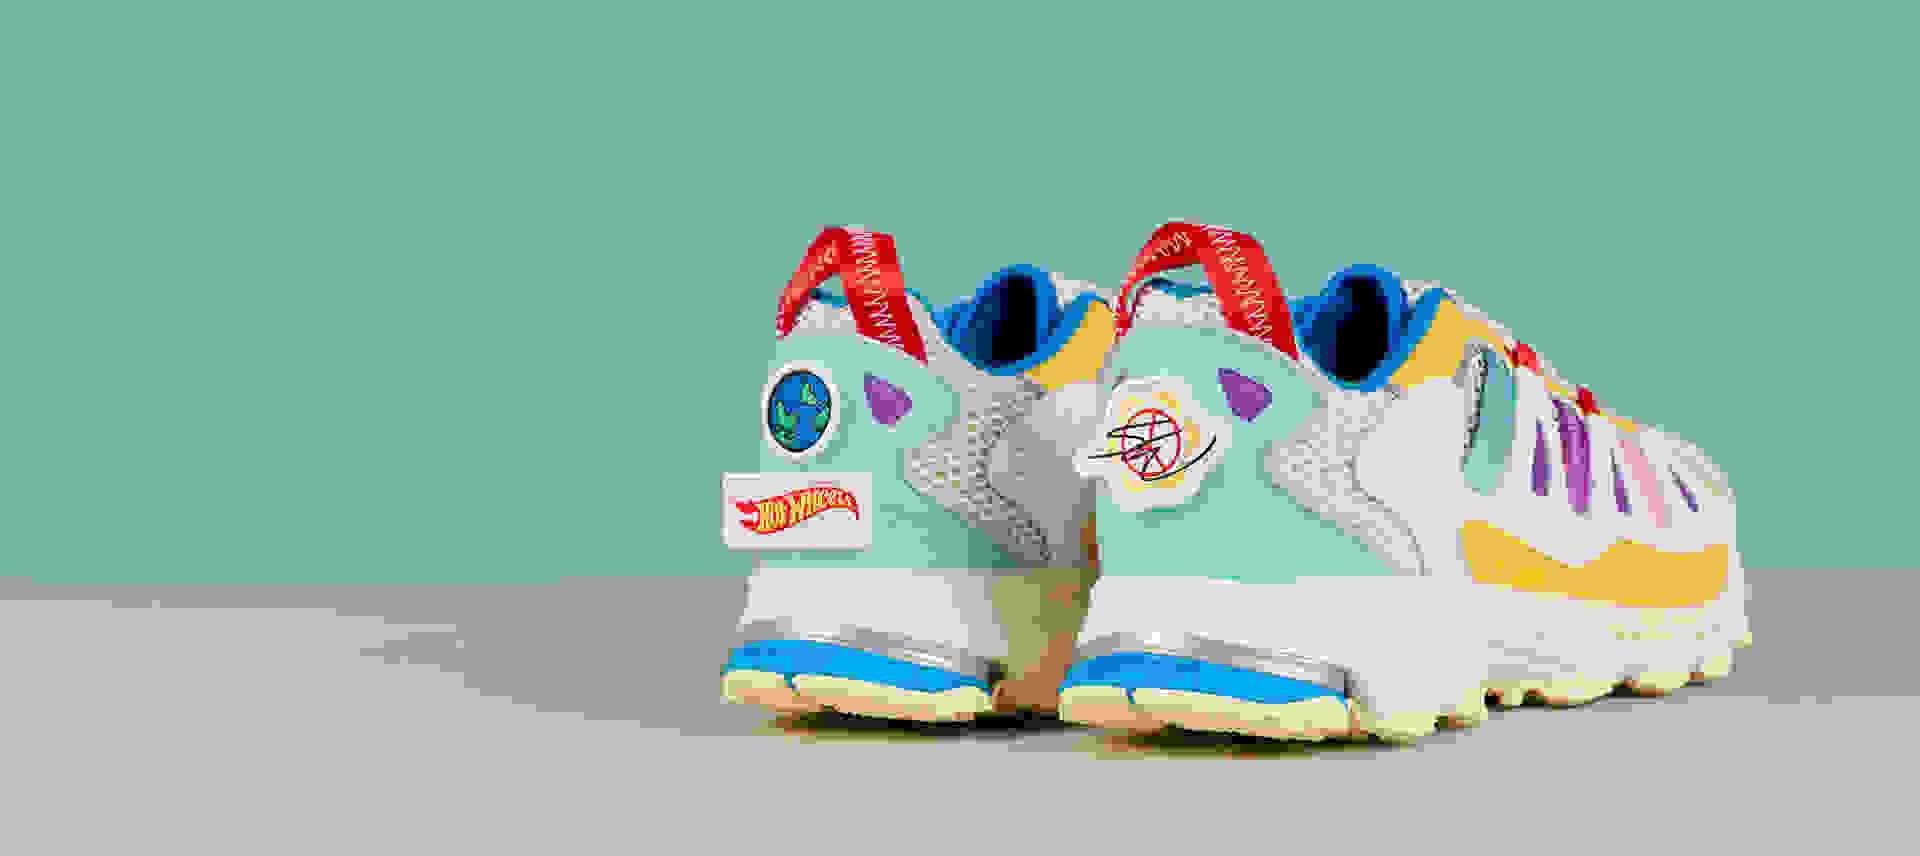 Rear view of adidas Originals x Sean Wotherspoon x Hot Wheels collaboration sneaker.